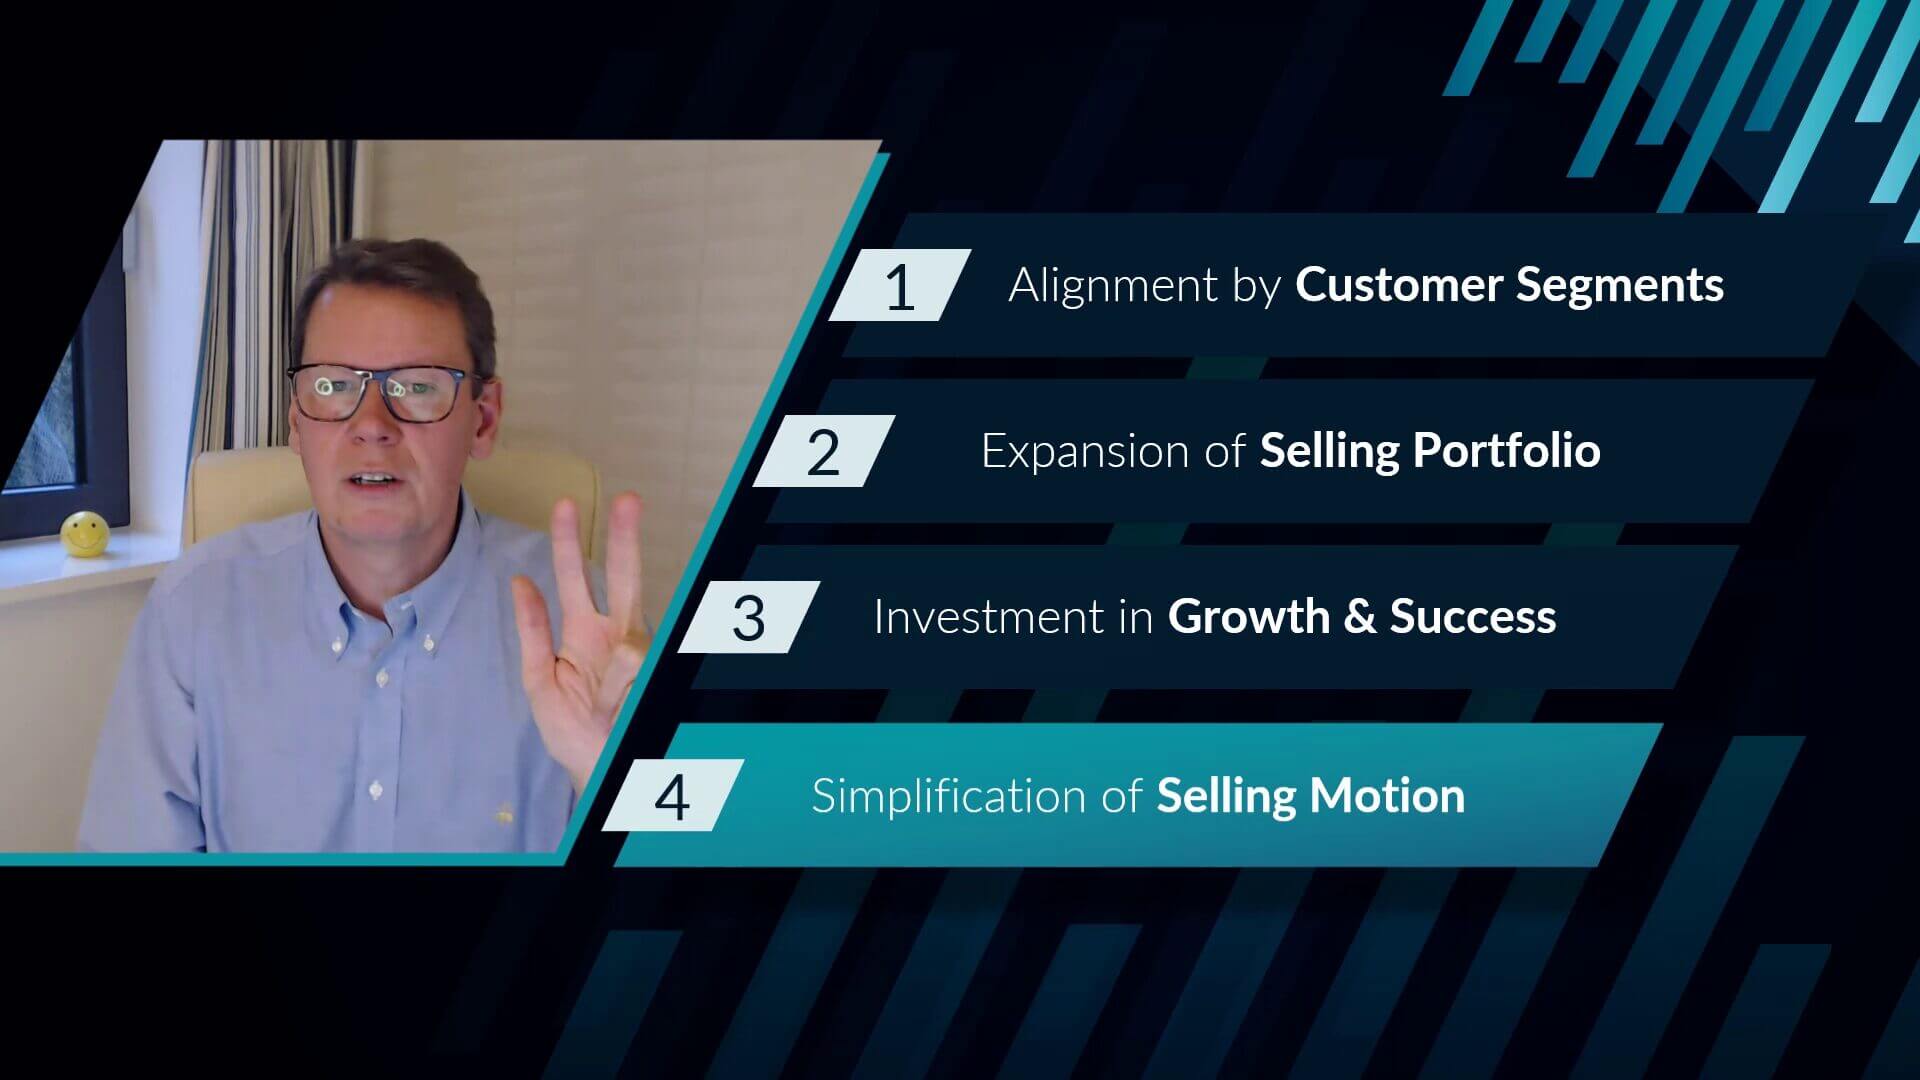 PowerPoint slide listing 4 points: Alignment by Customer Segments, Expansion of Selling Portfolio, Investment in Growth and Success, and Simplification of Selling Motion.